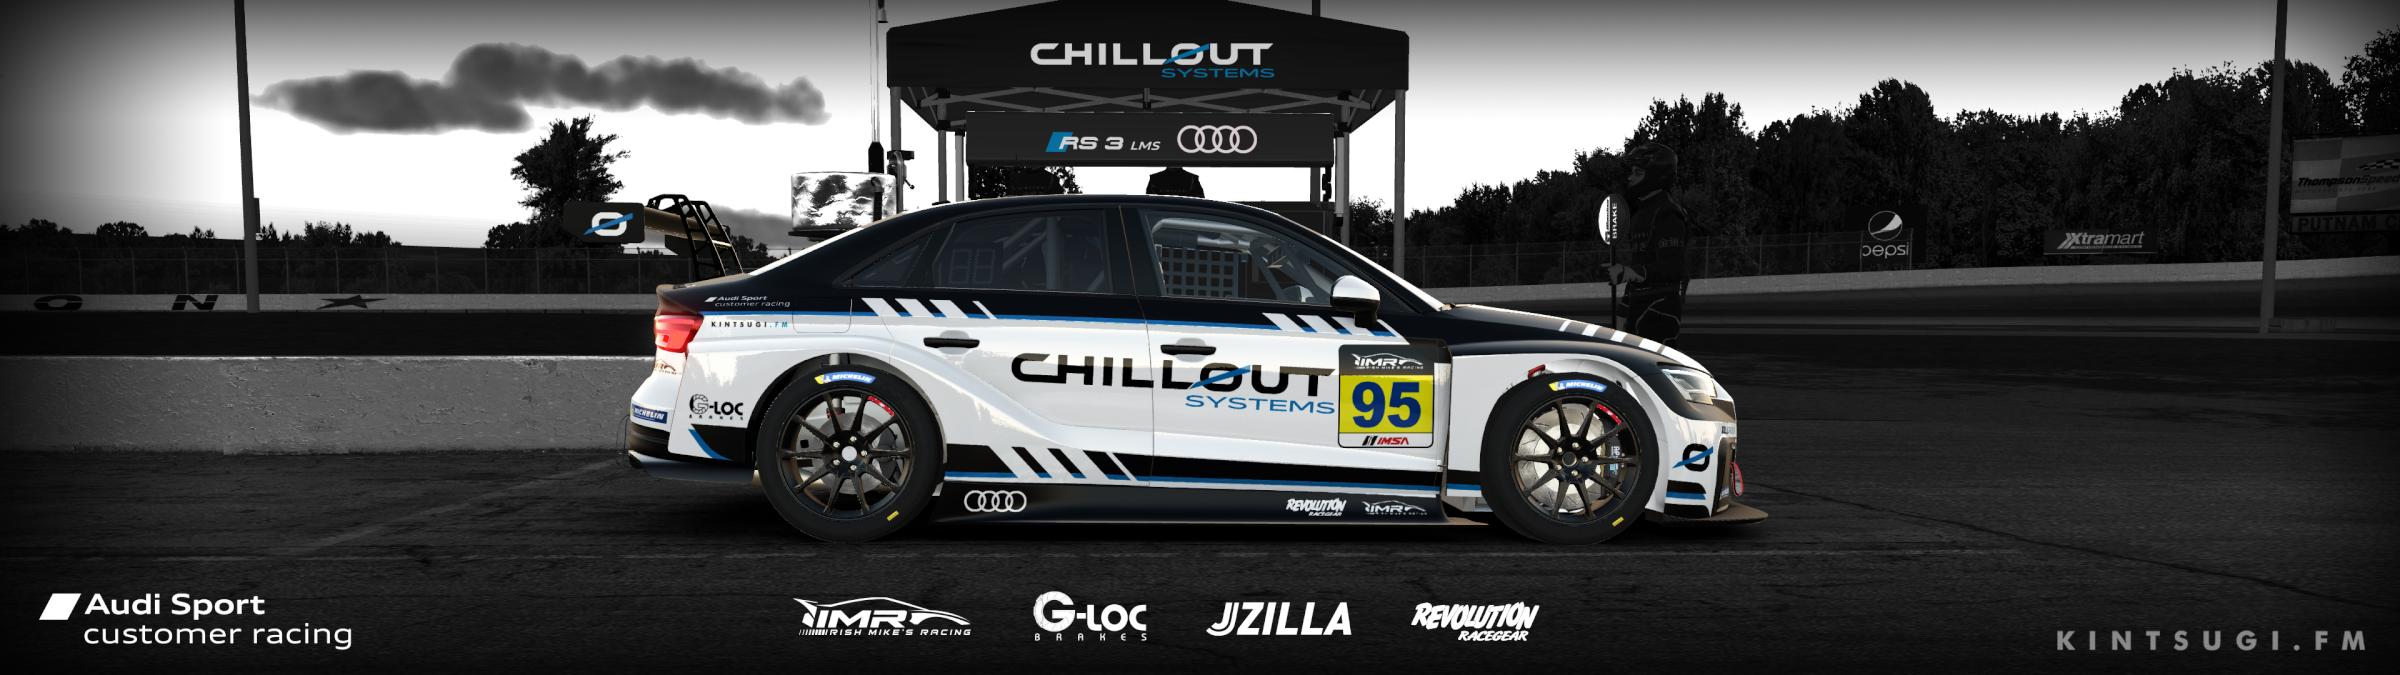 Preview of Irish Mikes Racing/Chillout Systems by Mikey Harland